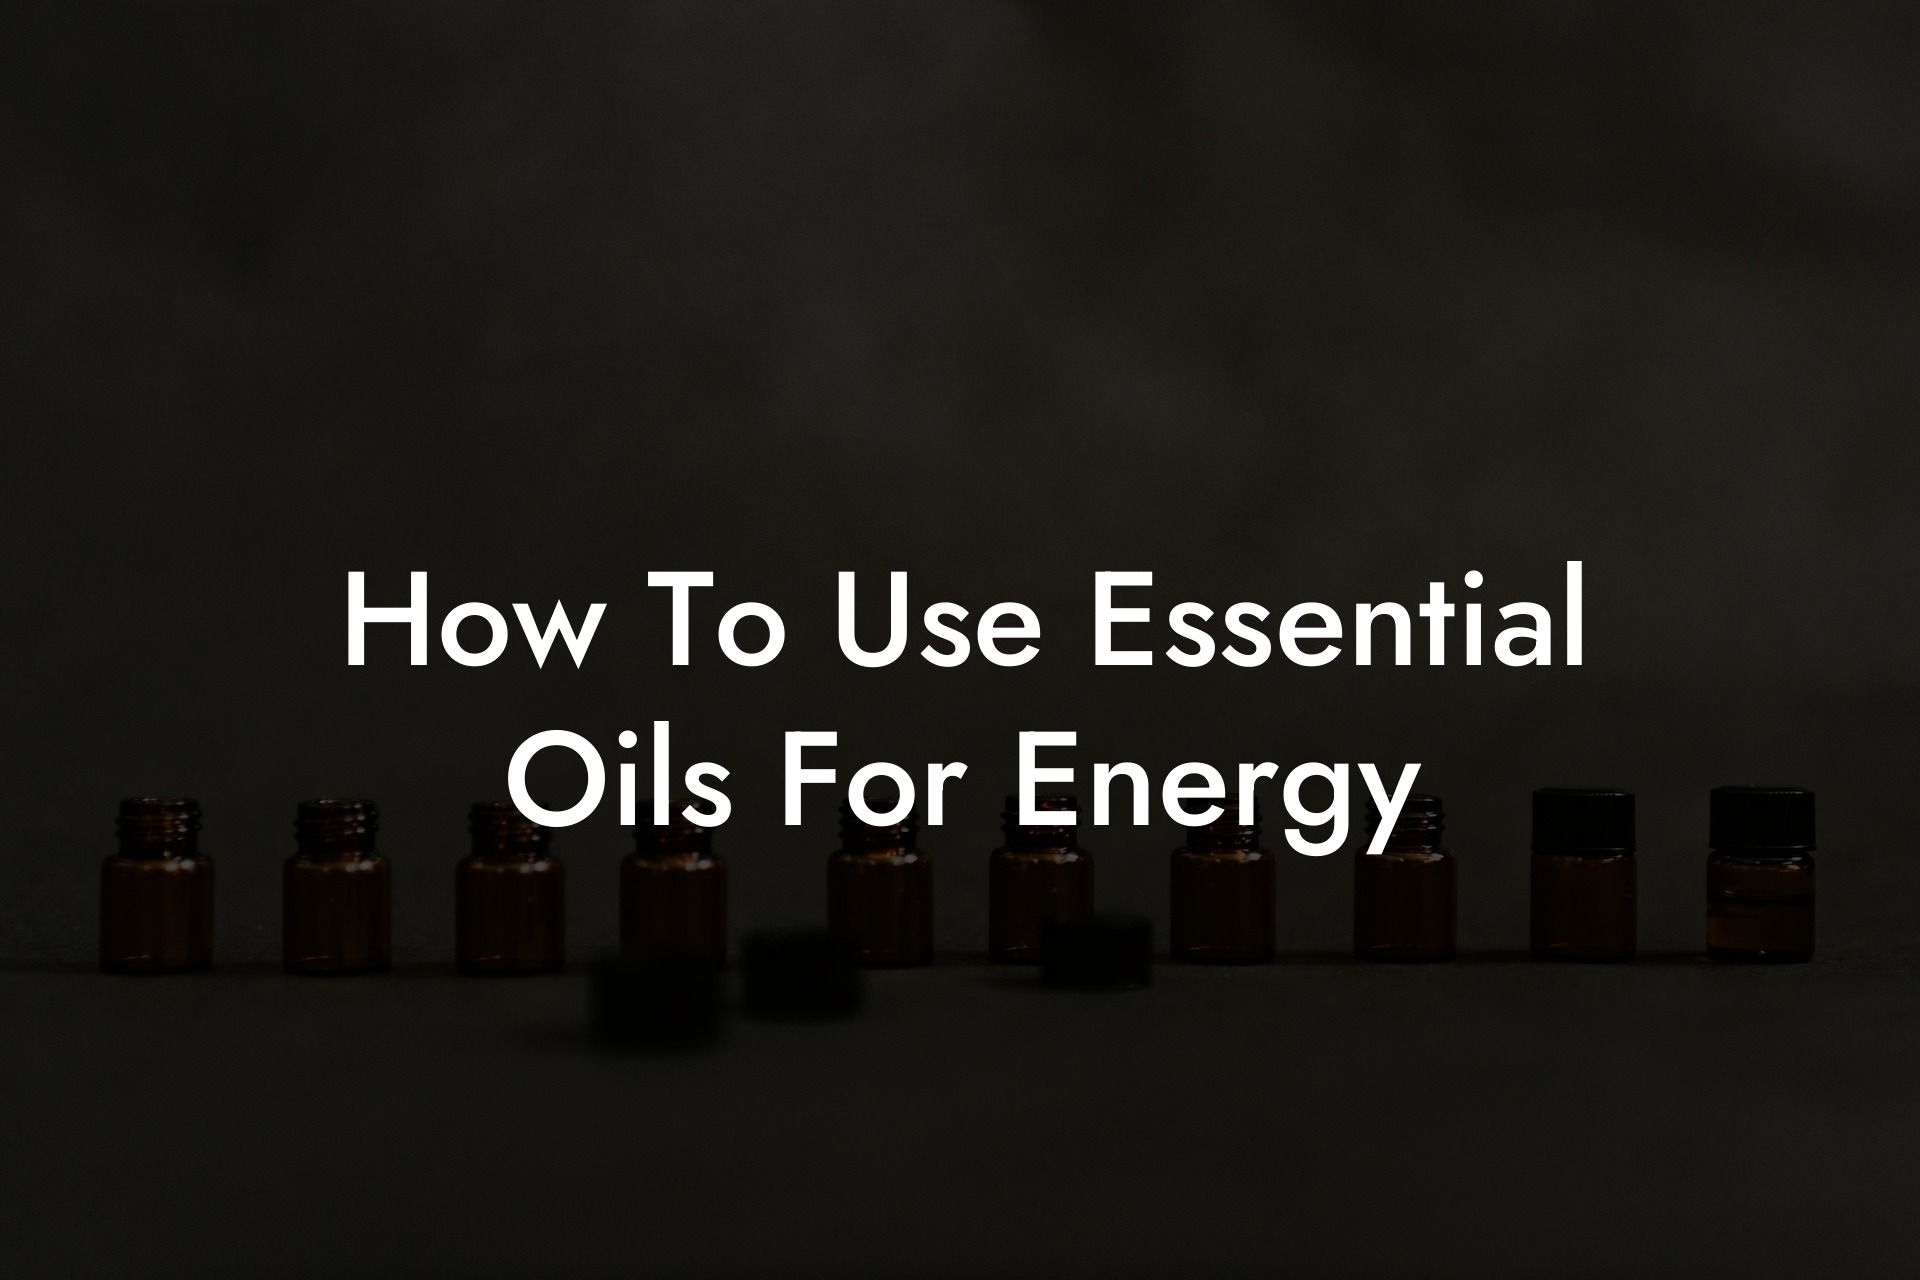 How To Use Essential Oils For Energy